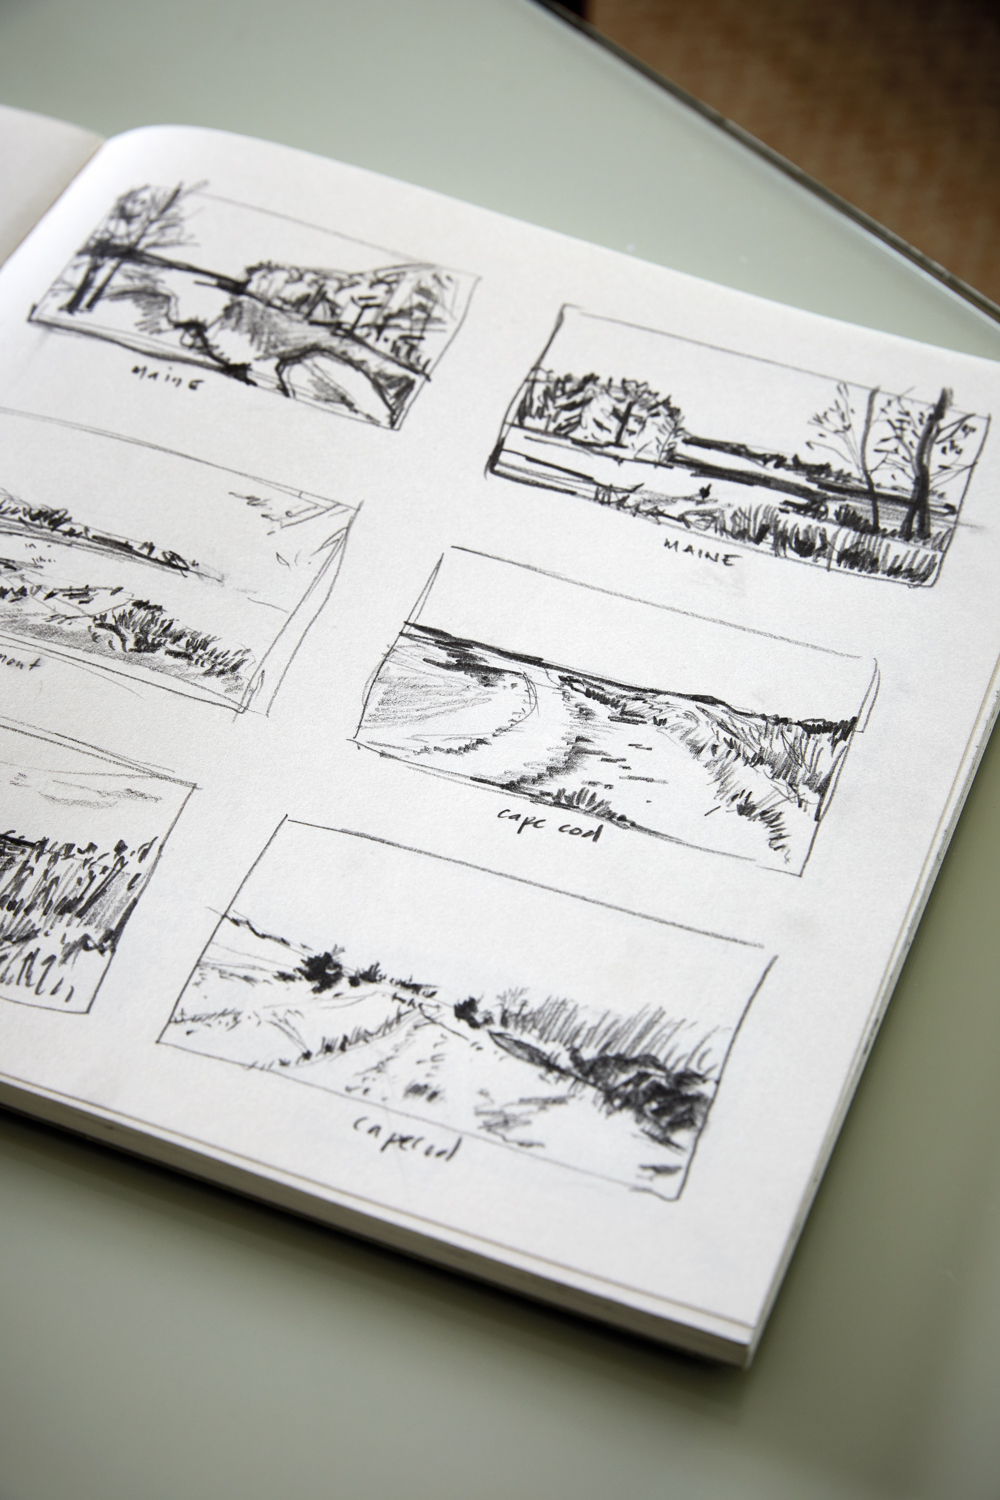 sketchbook with drawings of Maine and Cape Cod landscapes